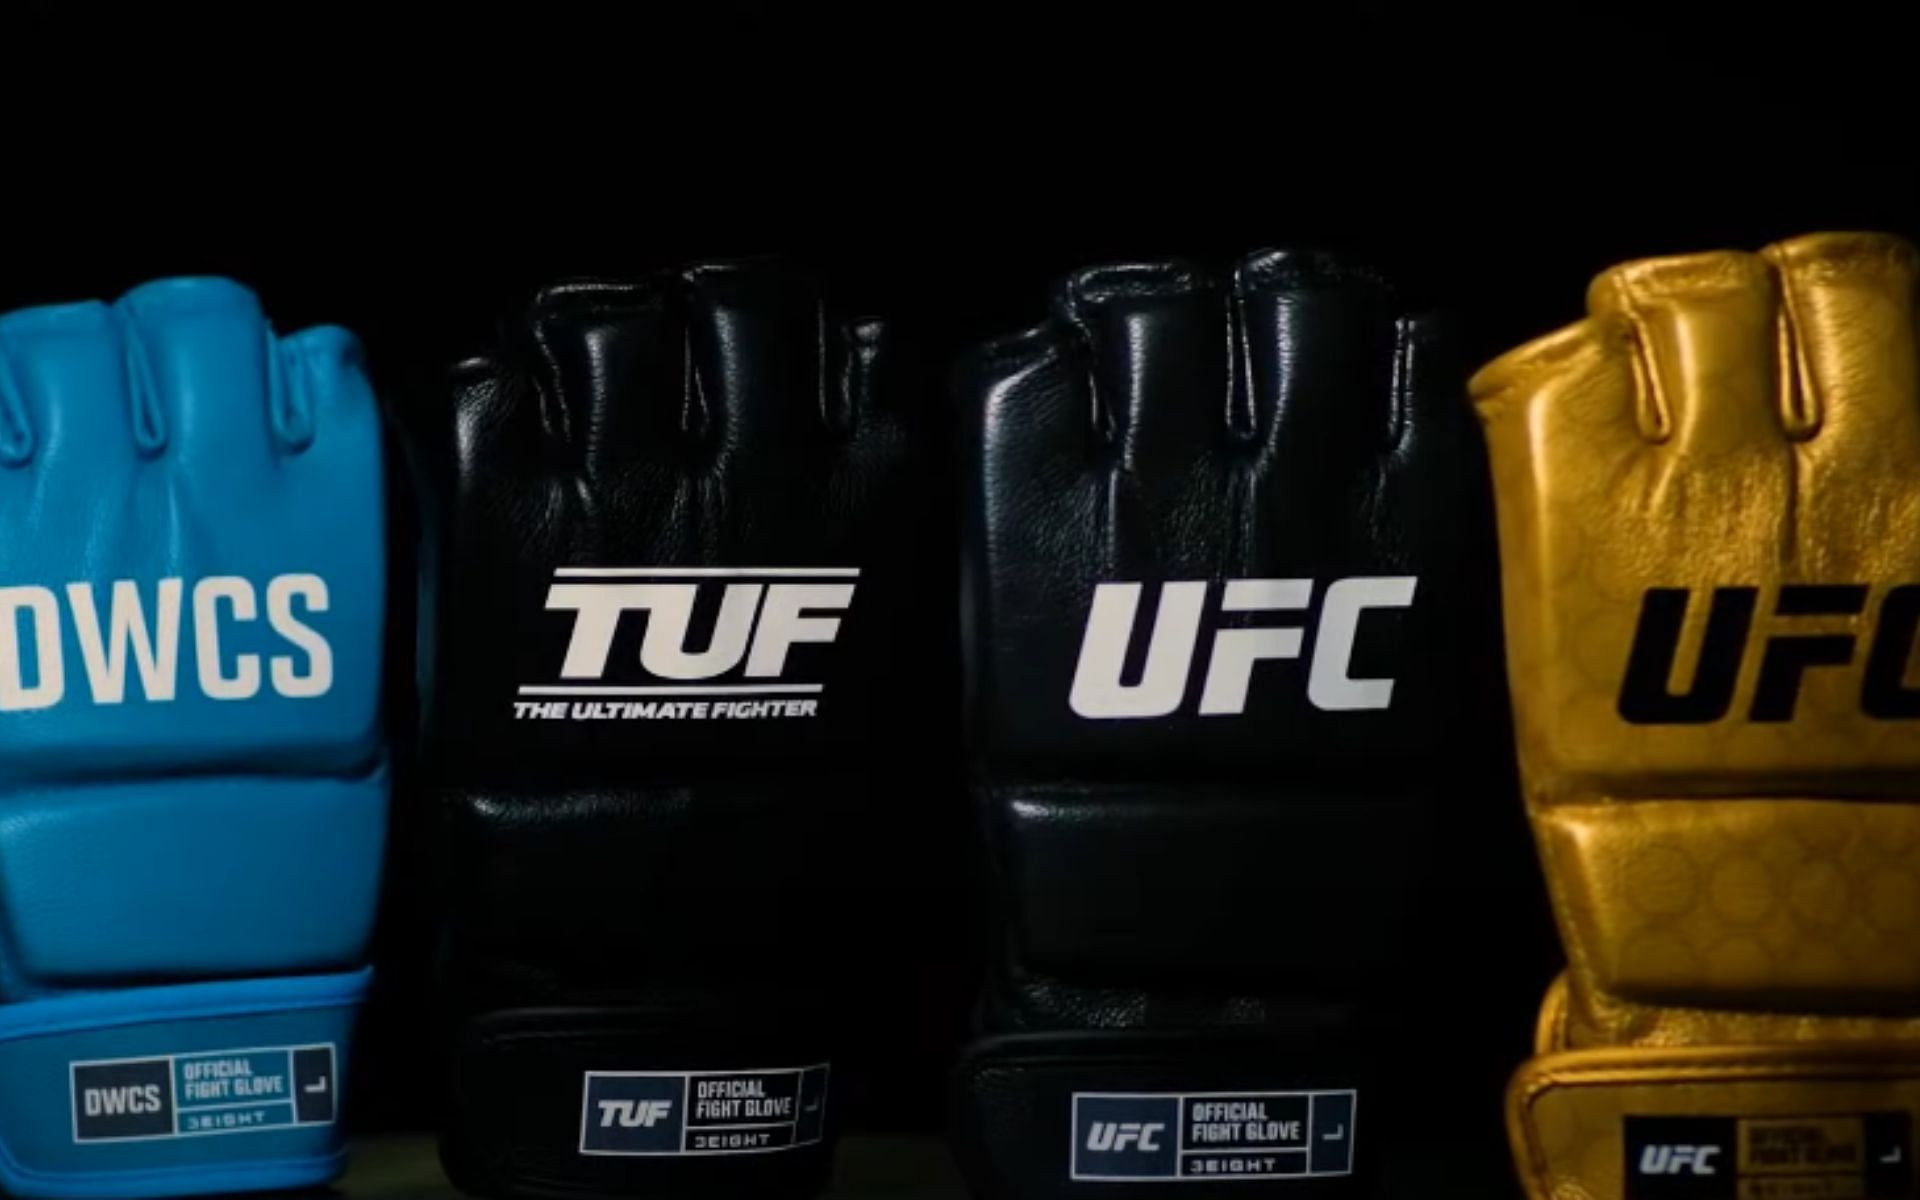 What will the new UFC gloves look like? Find out the weight, material, features, and colors [Image courtesy: UFC - YouTube]